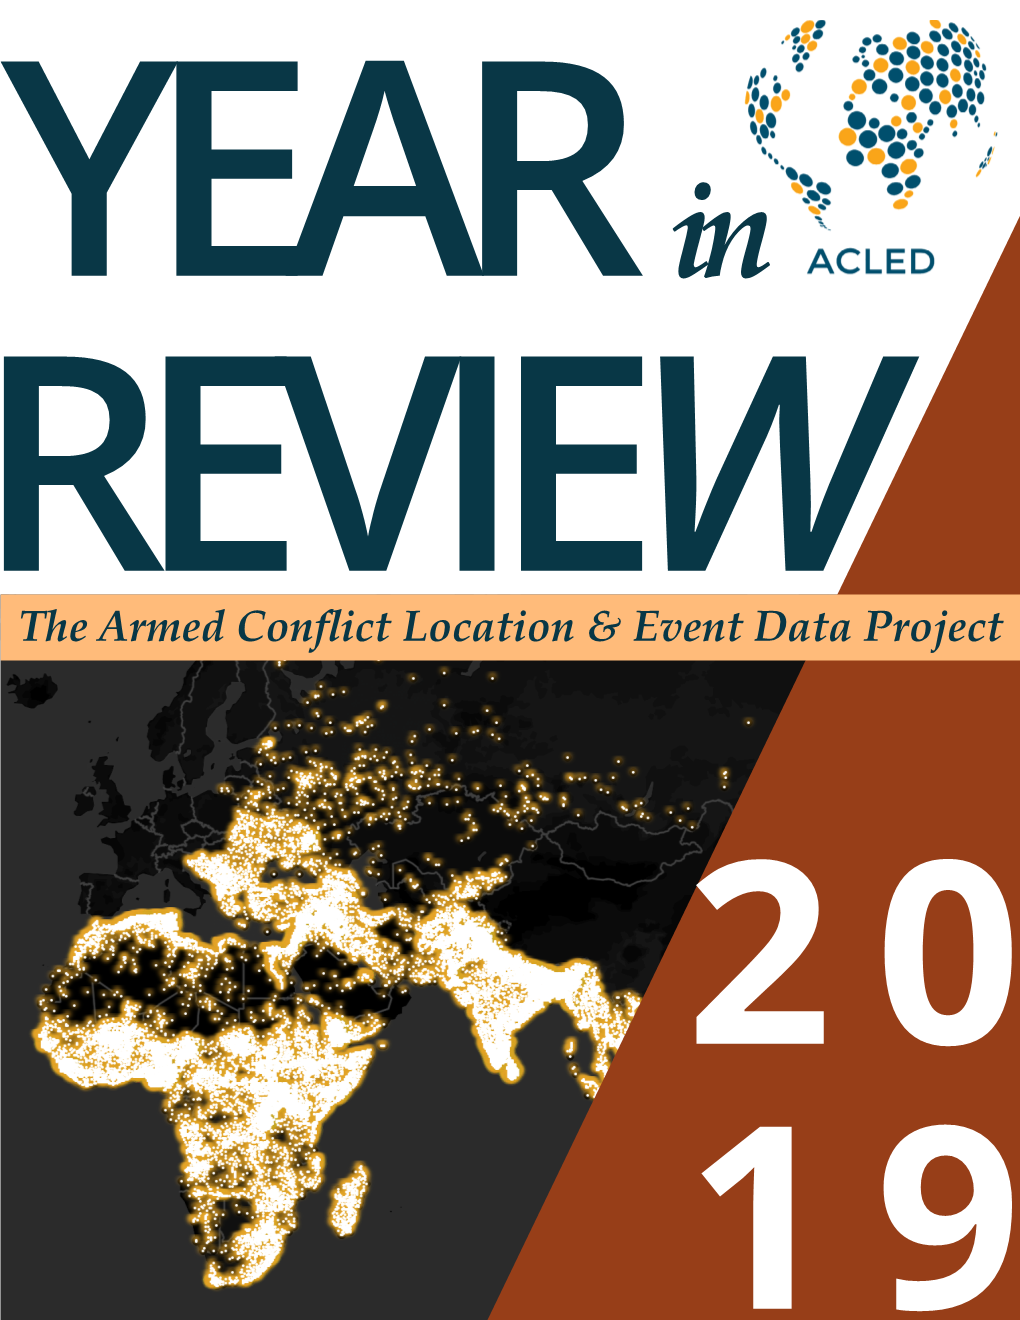 The Armed Conflict Location & Event Data Project